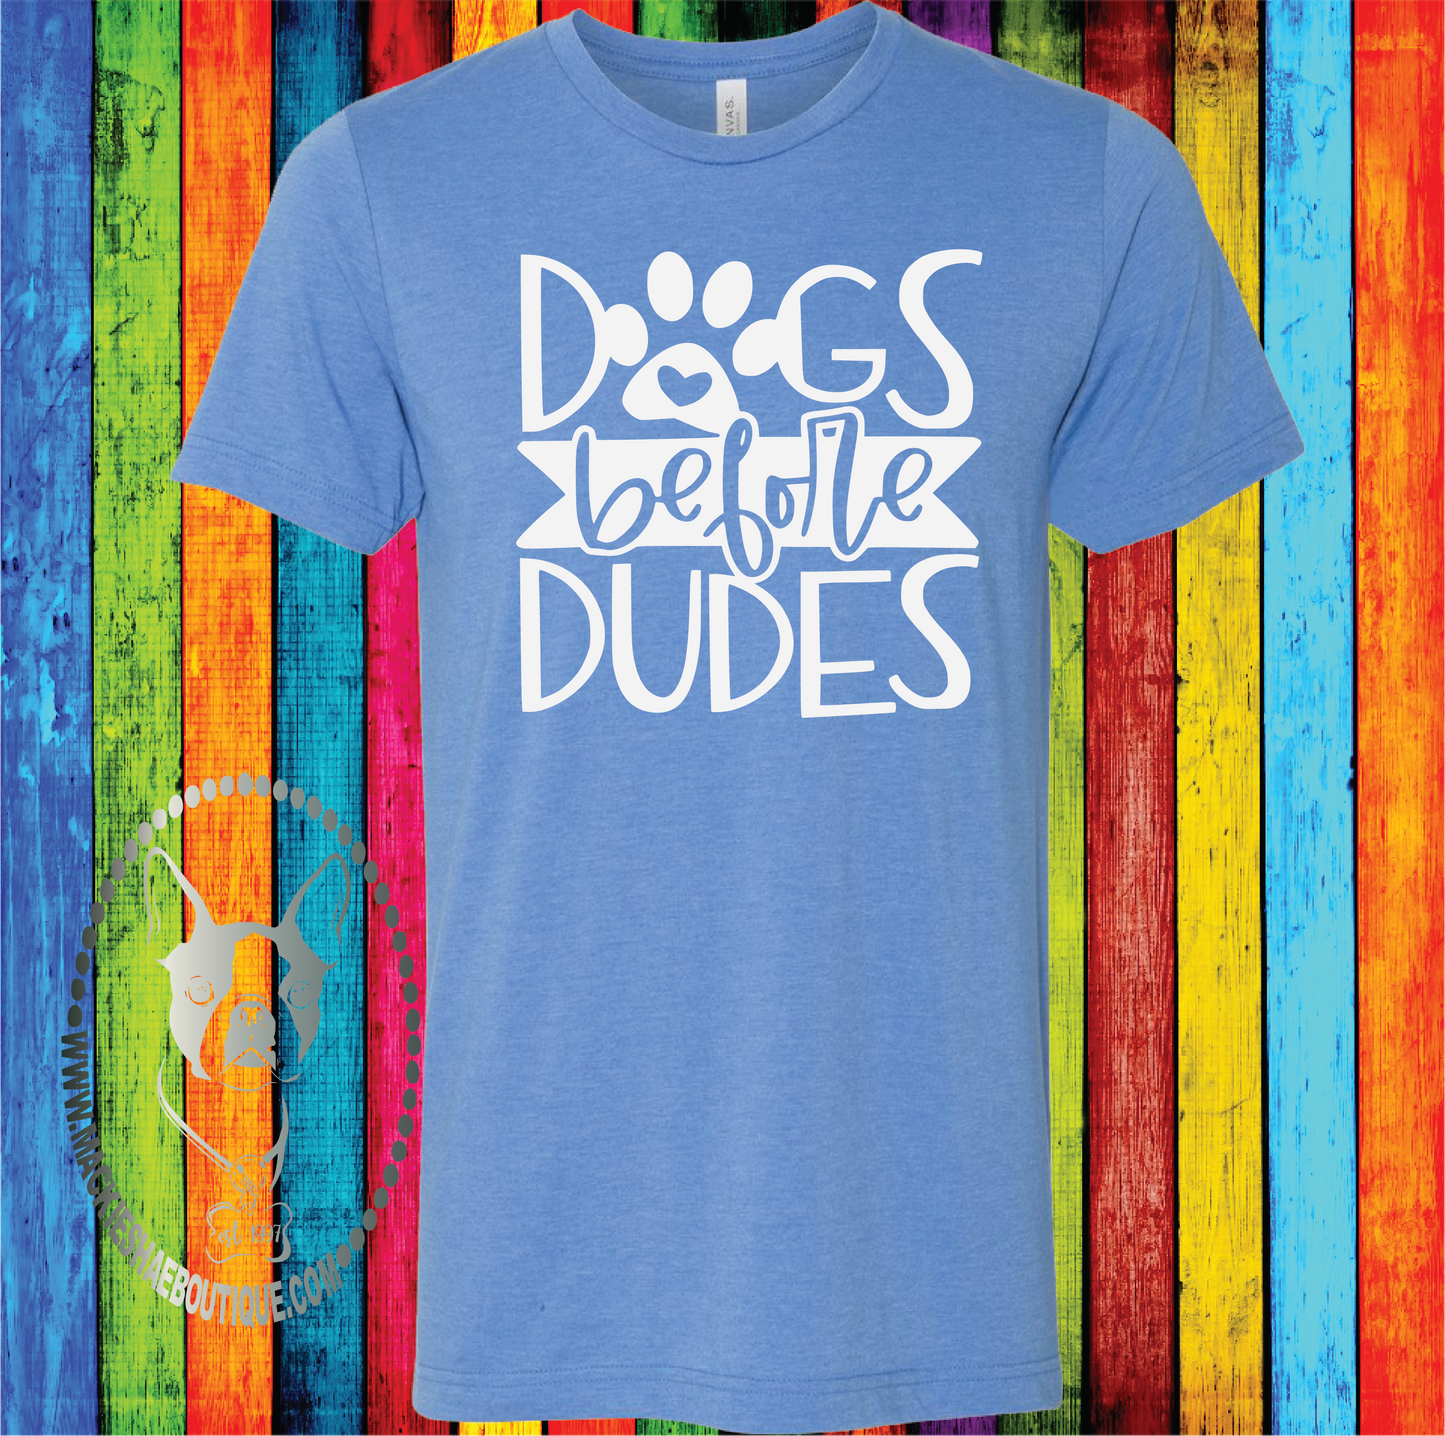 Dogs Before Dudes Custom Shirt for Kids and Adults, Soft Short Sleeve